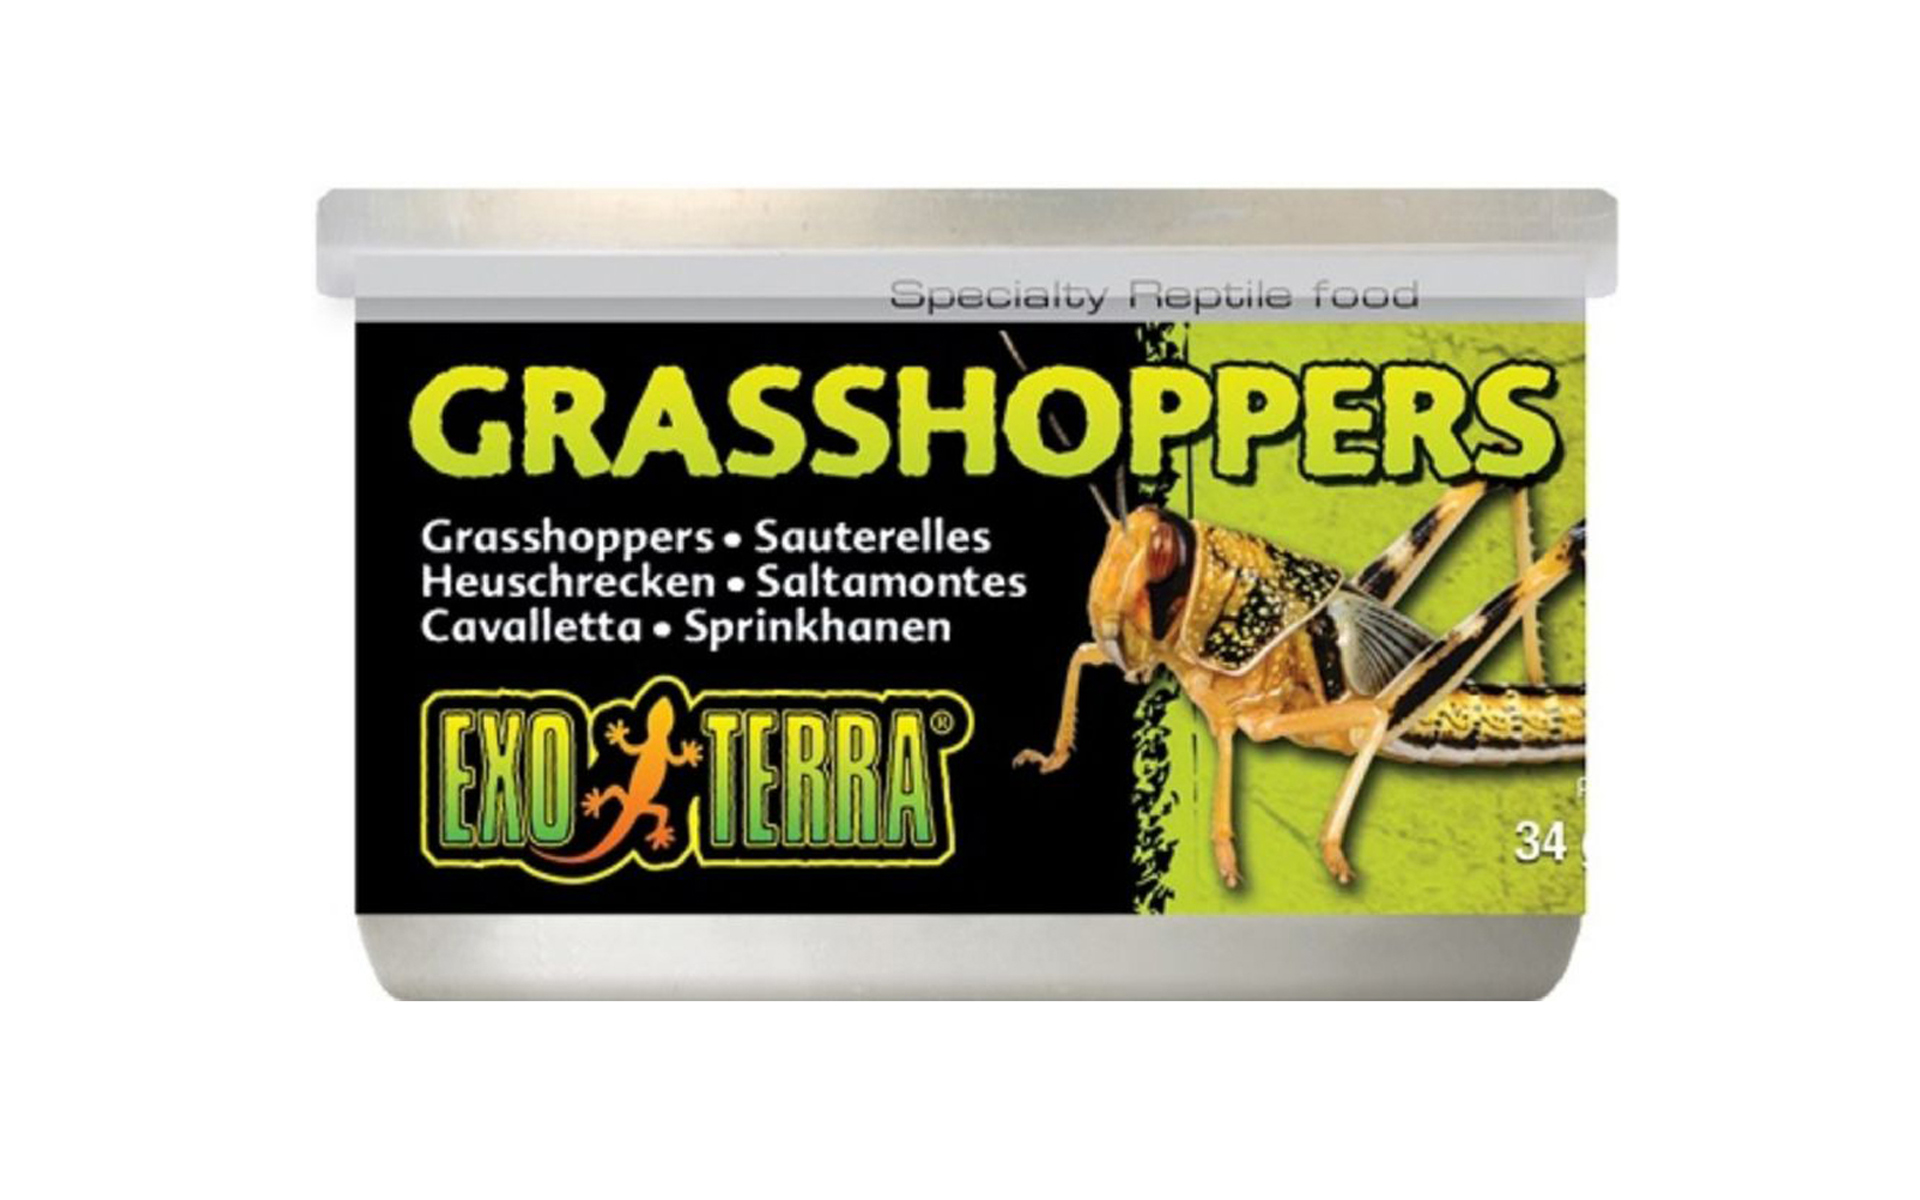 Grasshoppers Reptile Food, 1.2 oz (34 g)